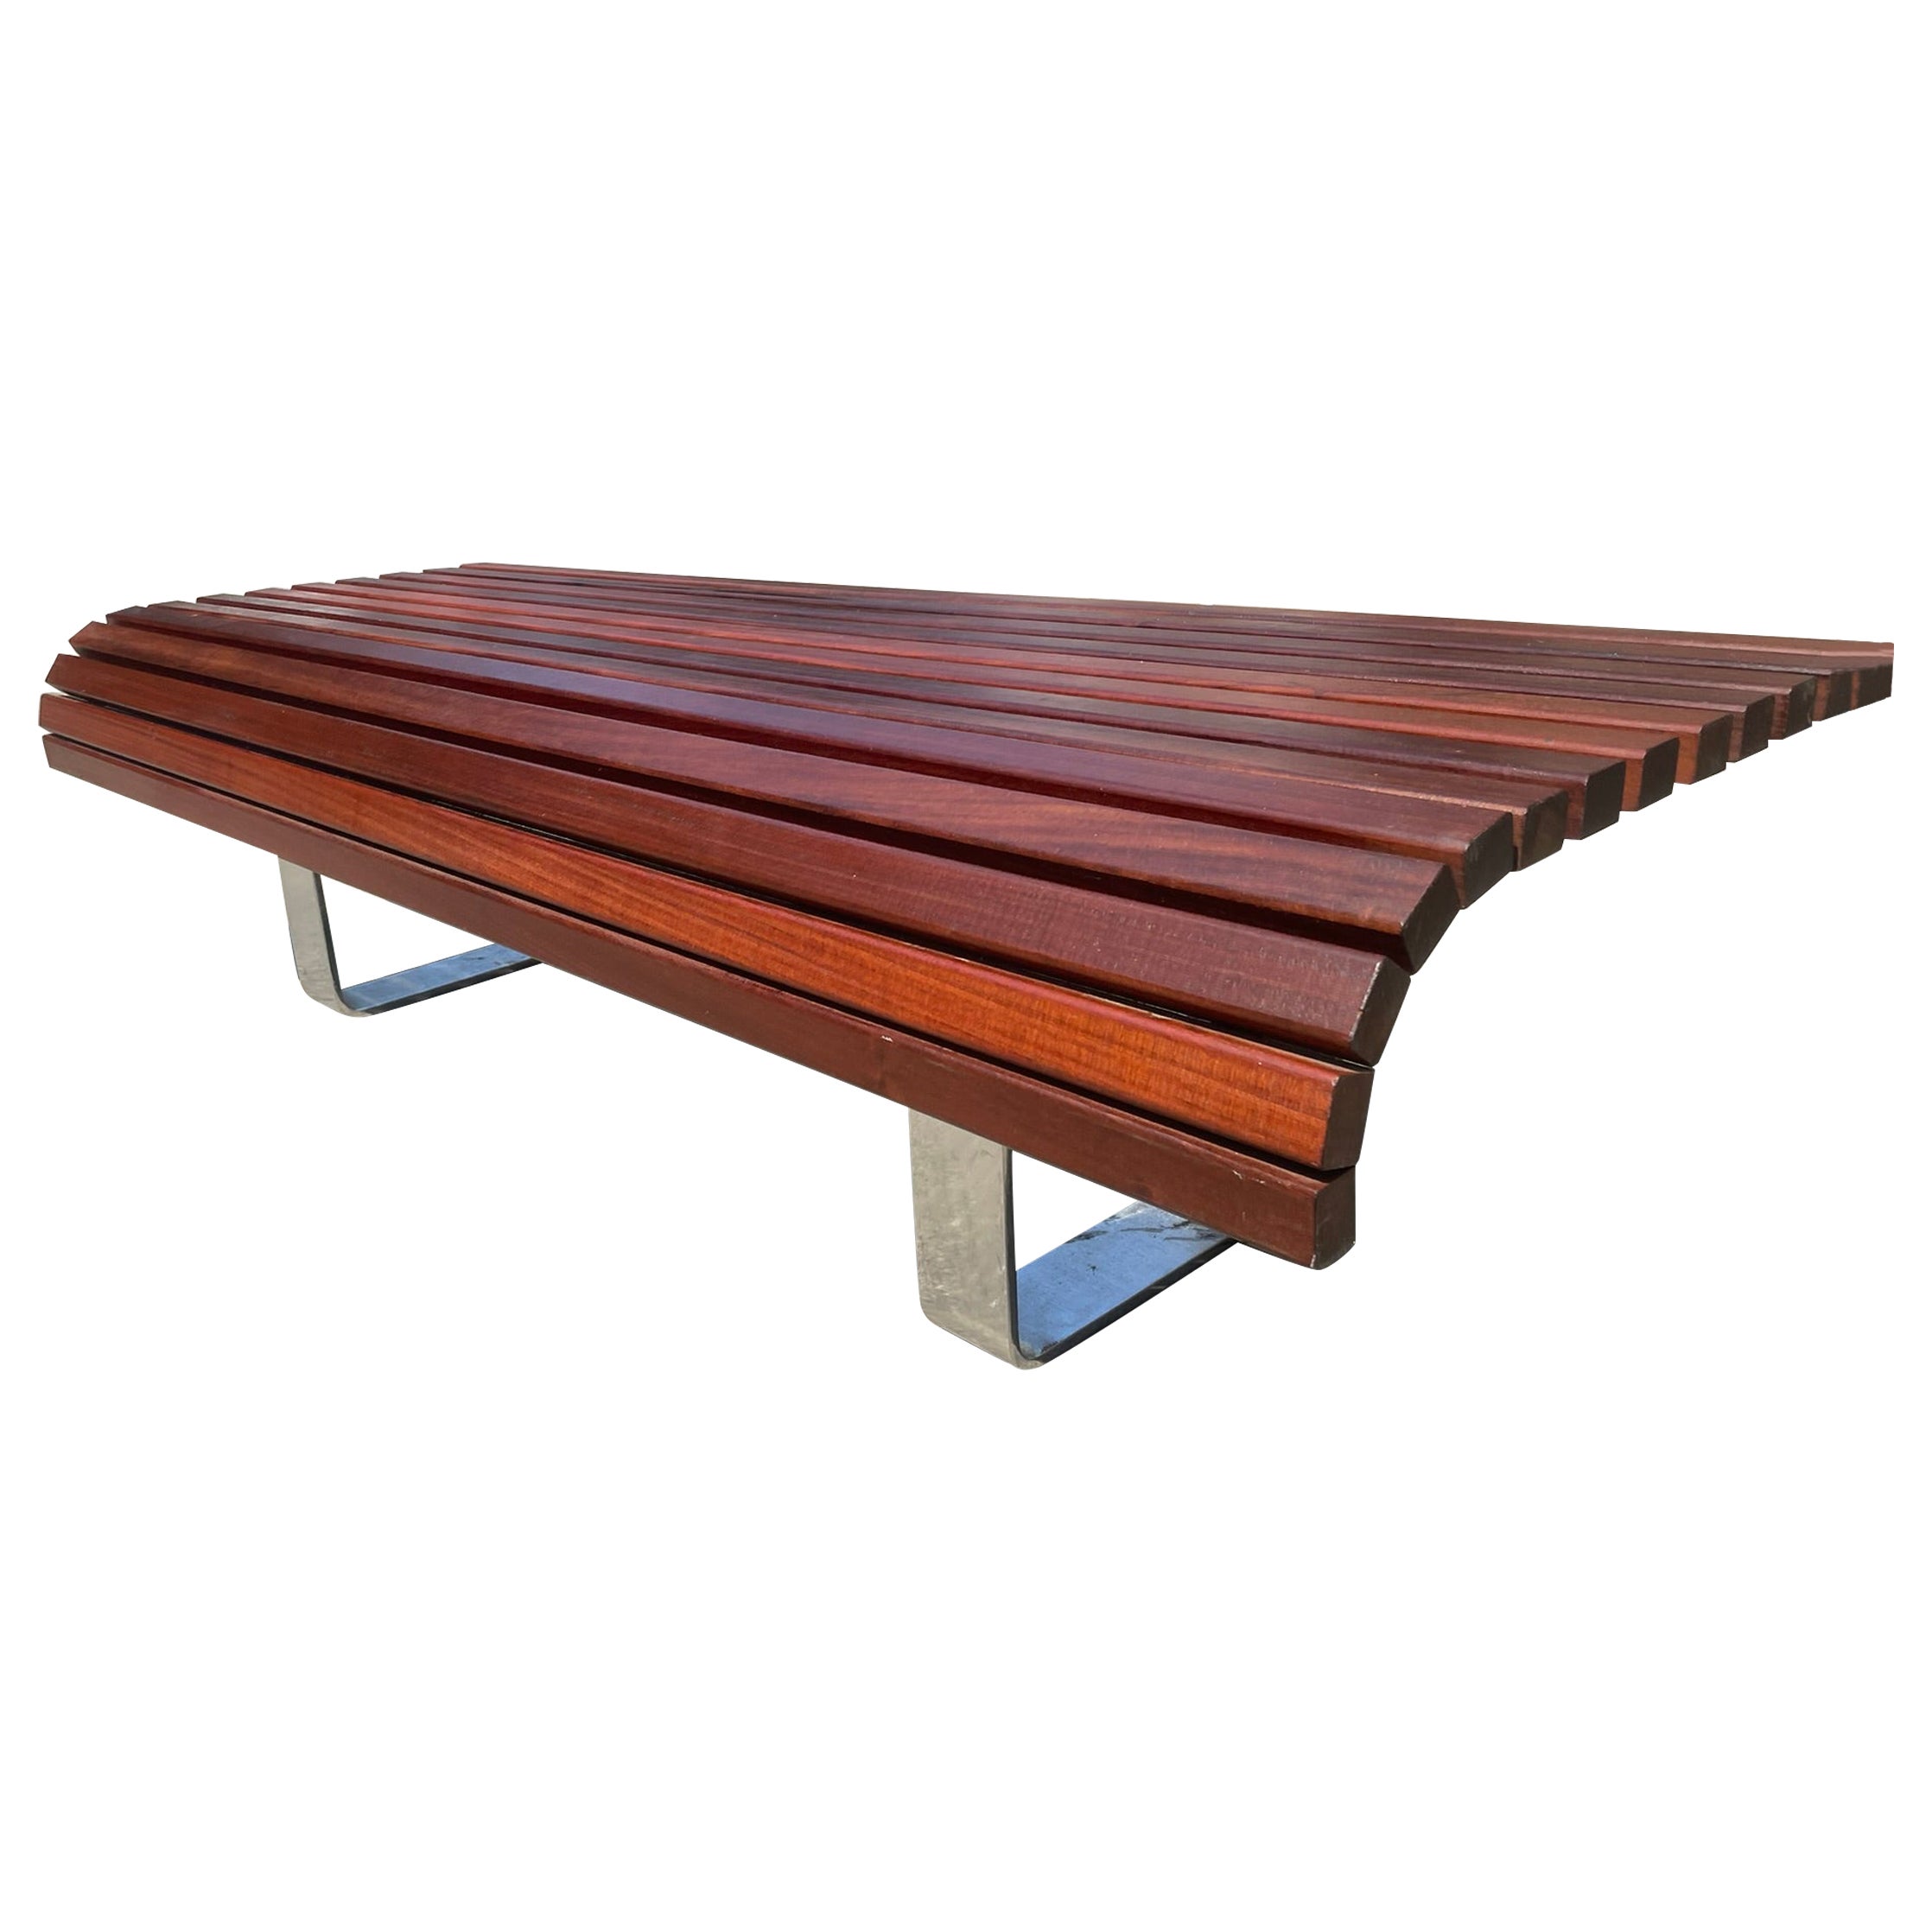 Does redwood make a good table?